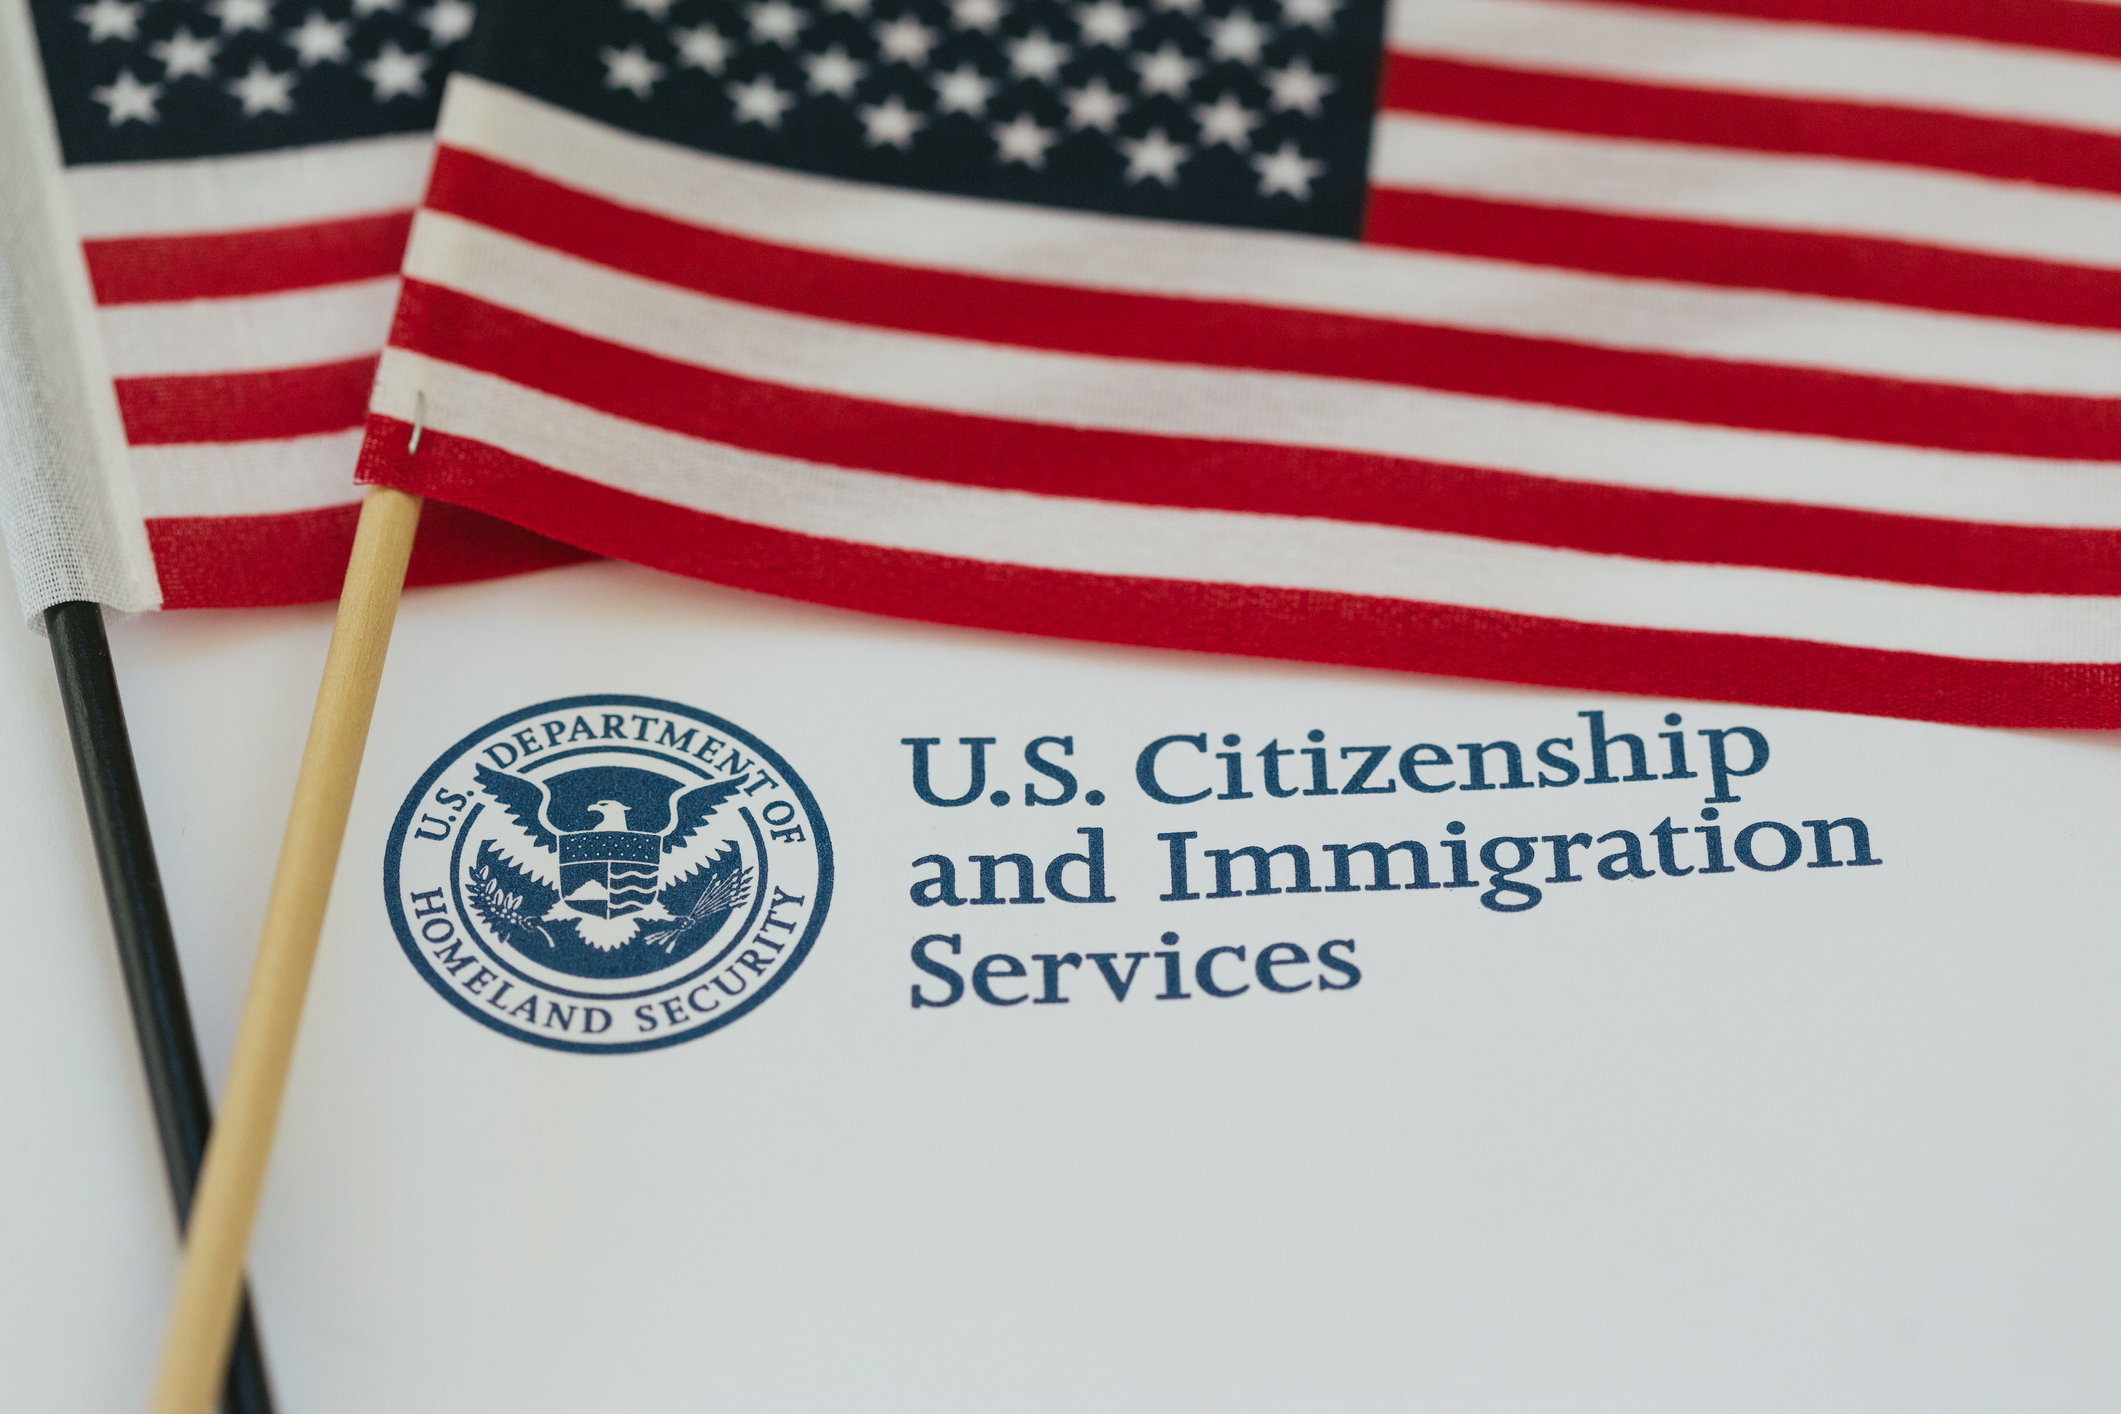 flag beside U.S. Citizenship and Immigration Services seal